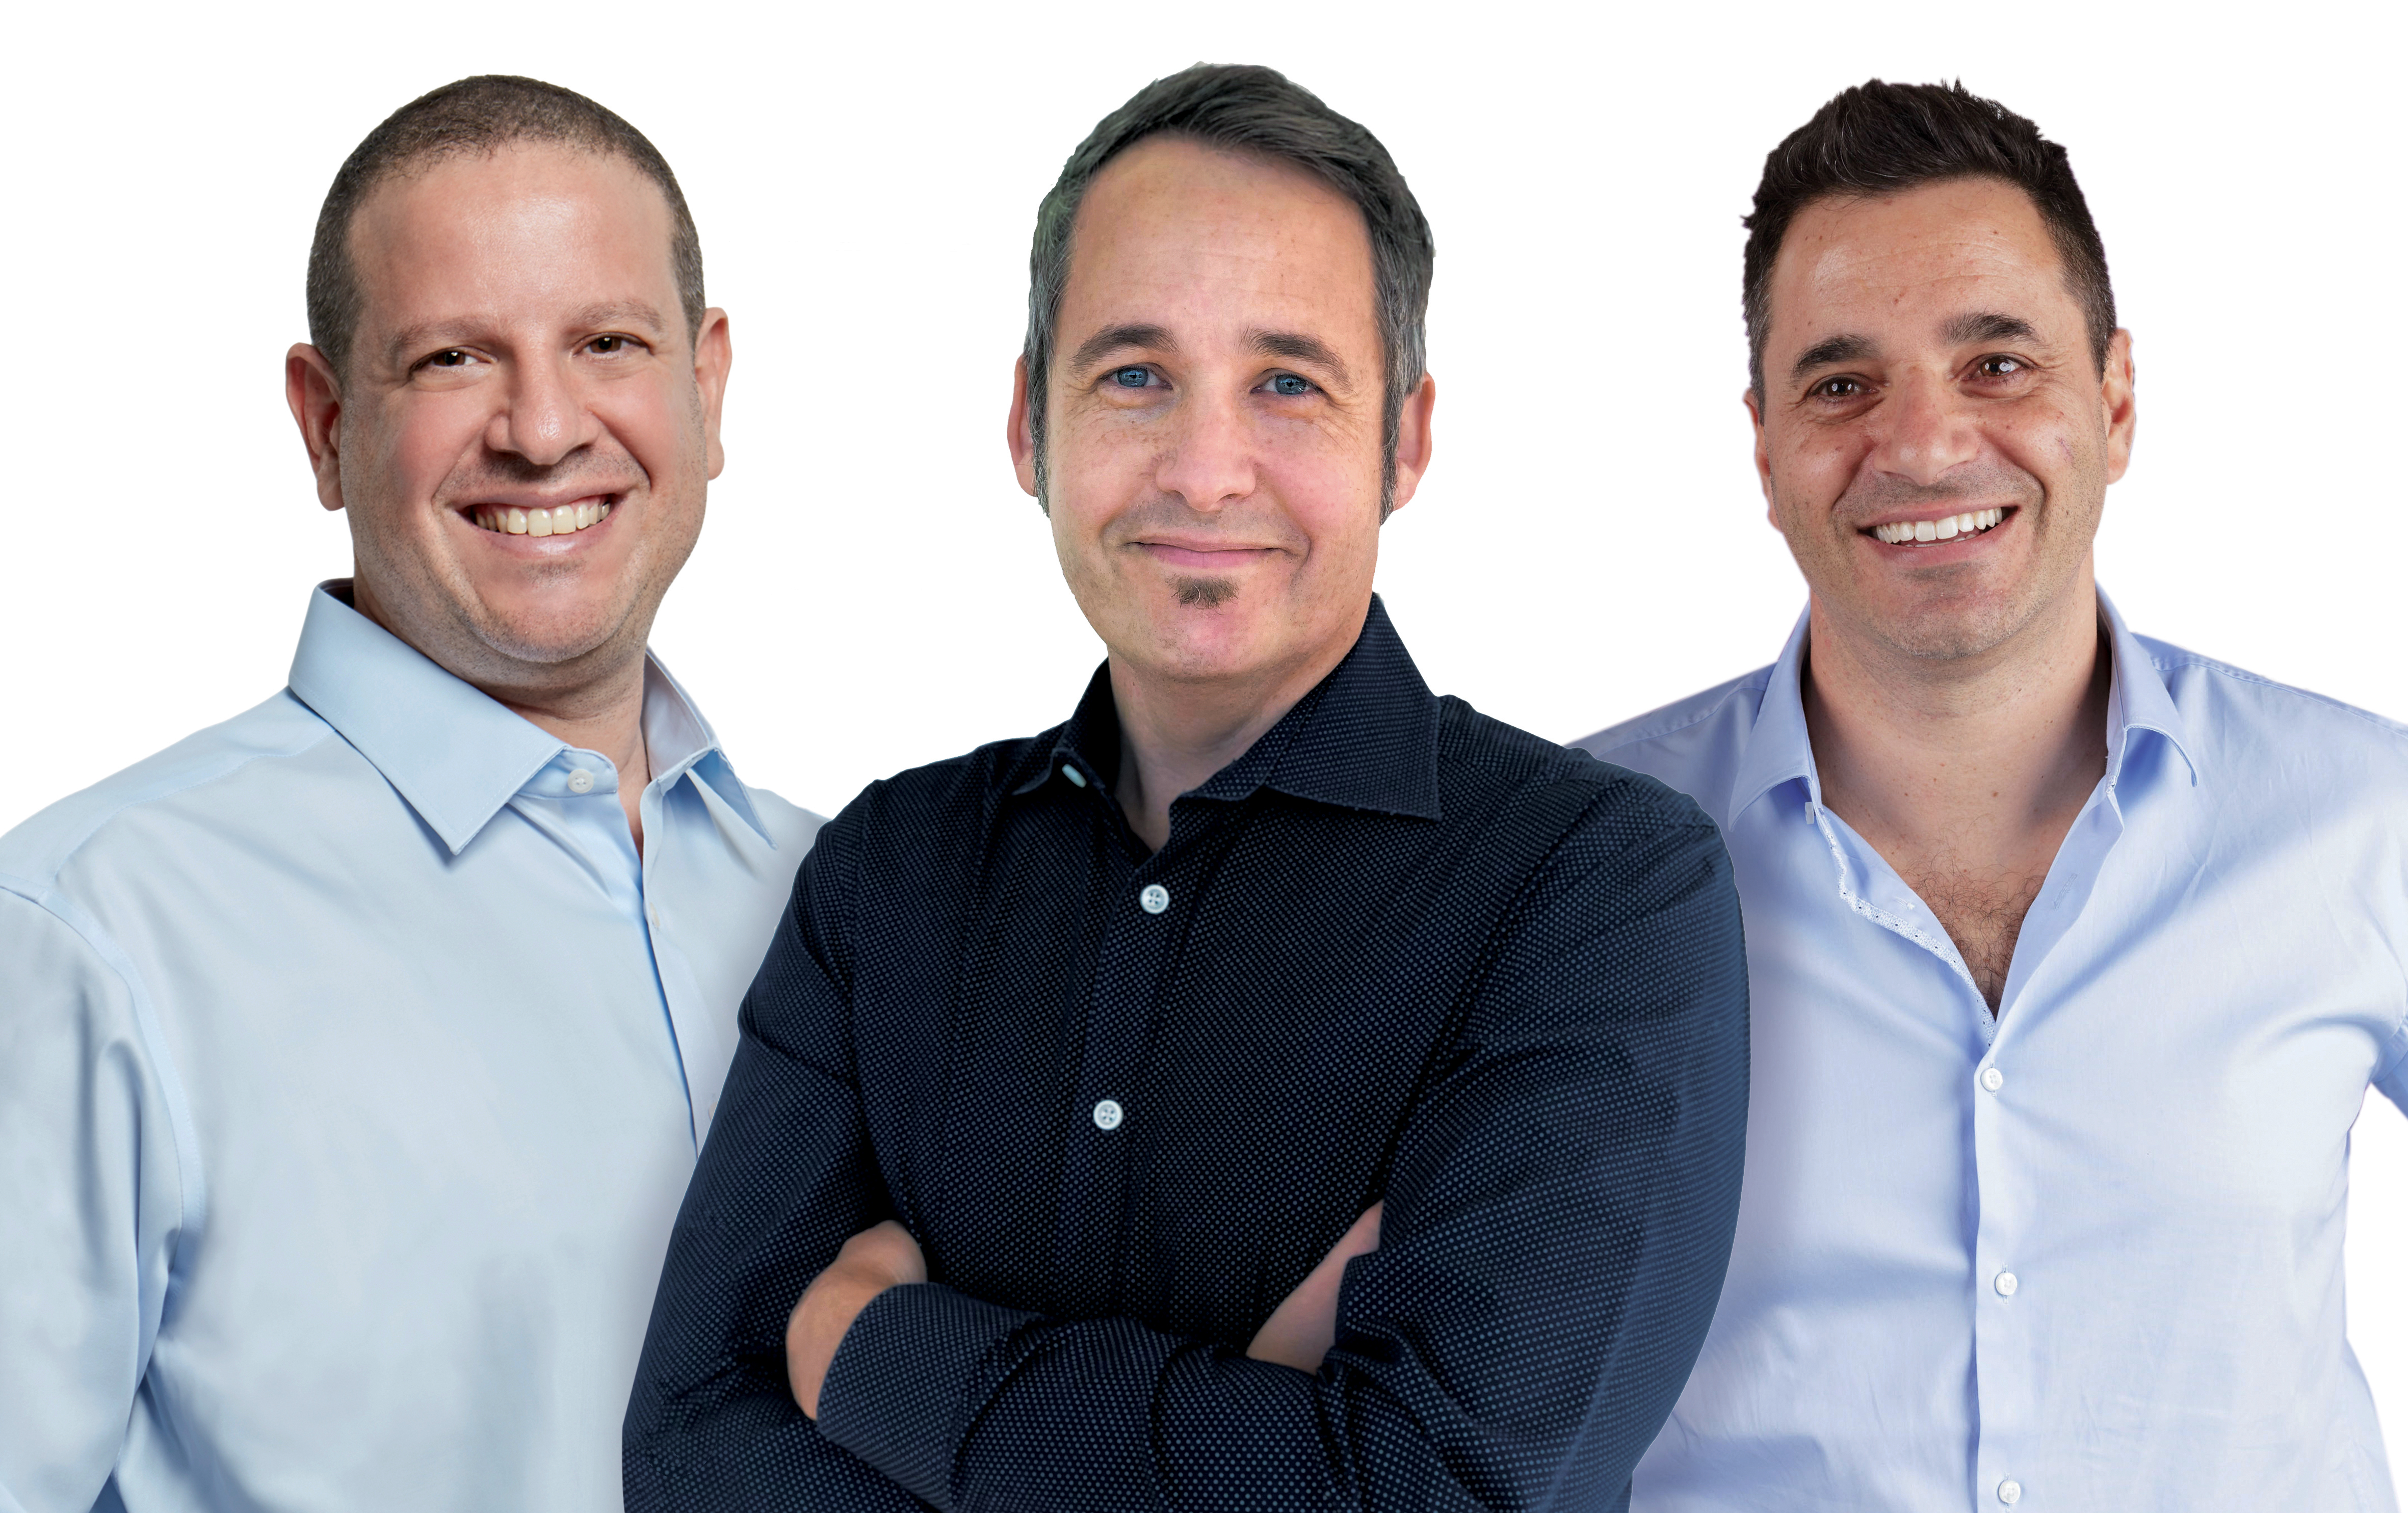 A group photo of Trax's co-founders, Joel Bar-El (left) and Dror Feldheim (right), and Trax's CEO, Justin Behar (center)